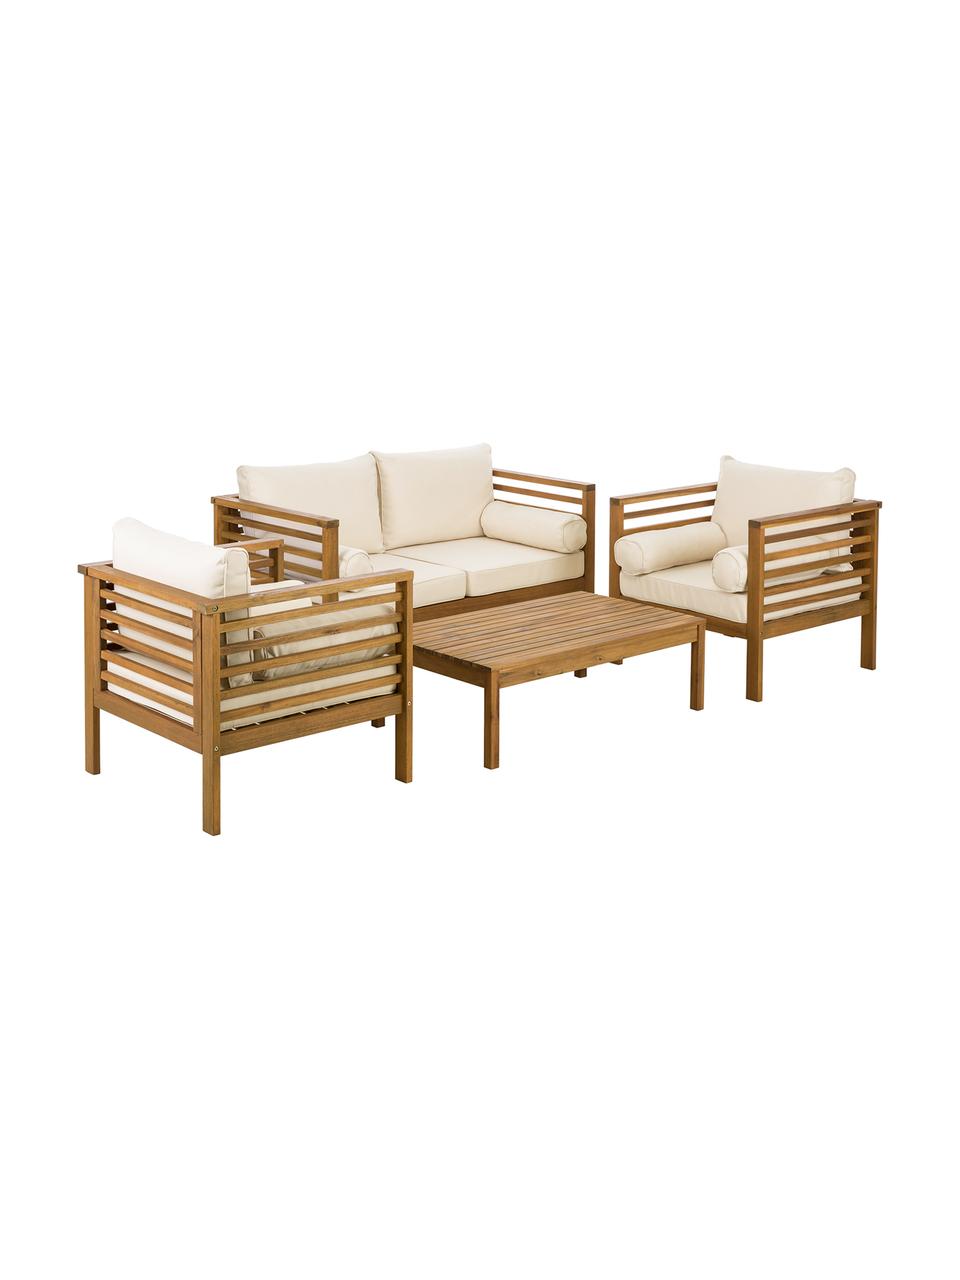 Tuin loungeset Bo, 4-delig, Frame: massief geolied acaciahou, Hoes: beige, frame: acaciahout, Set met verschillende groottes